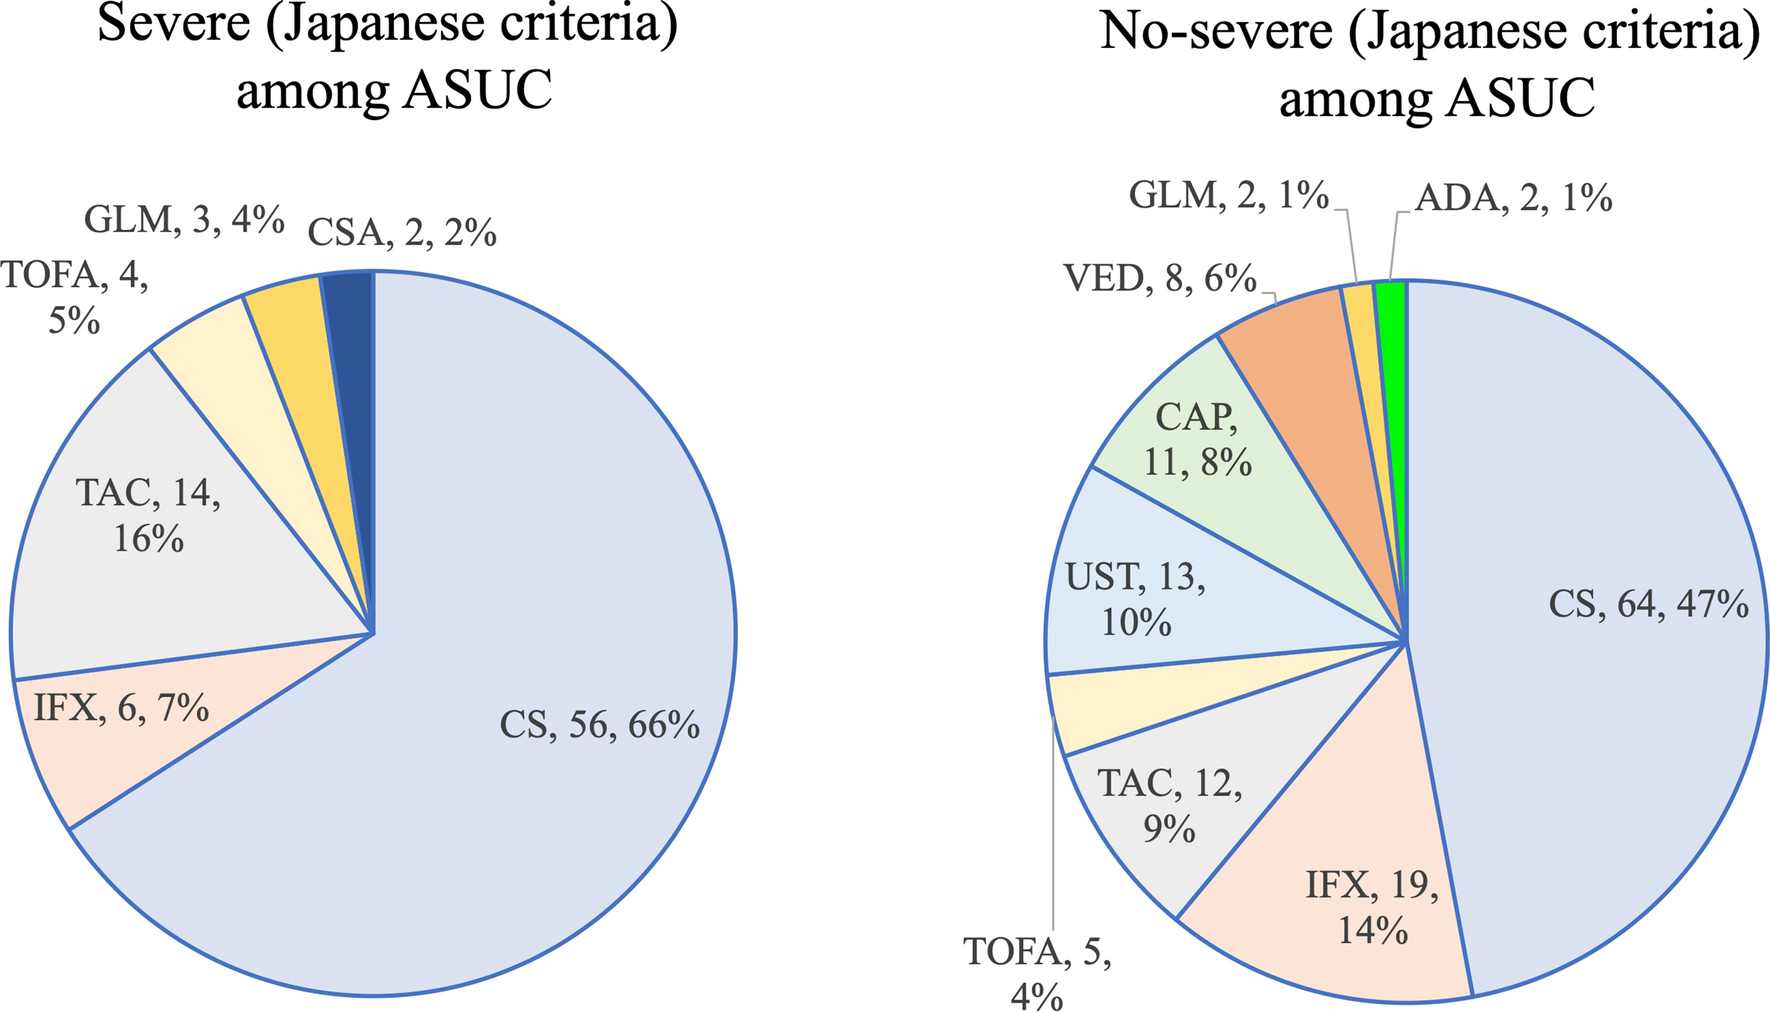 Medical treatment selection and outcomes for hospitalized patients with severe ulcerative colitis as defined by the Japanese criteria